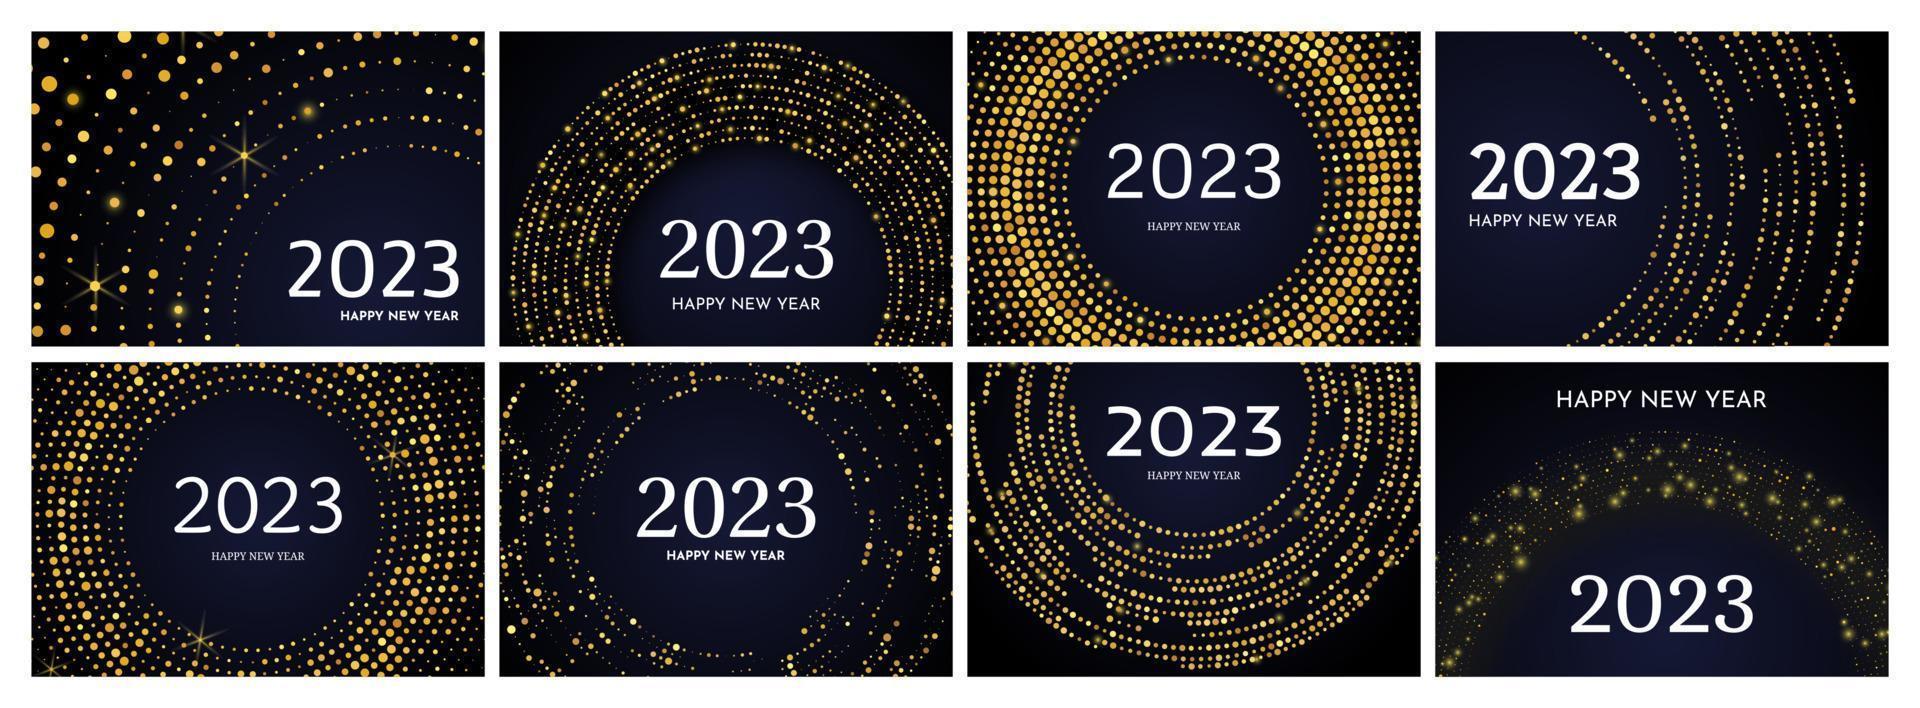 2023 Happy New Year of gold glitter pattern in circle form. Set of abstract gold glowing halftone dotted backgrounds for Christmas holiday greeting card on dark background. Vector illustration